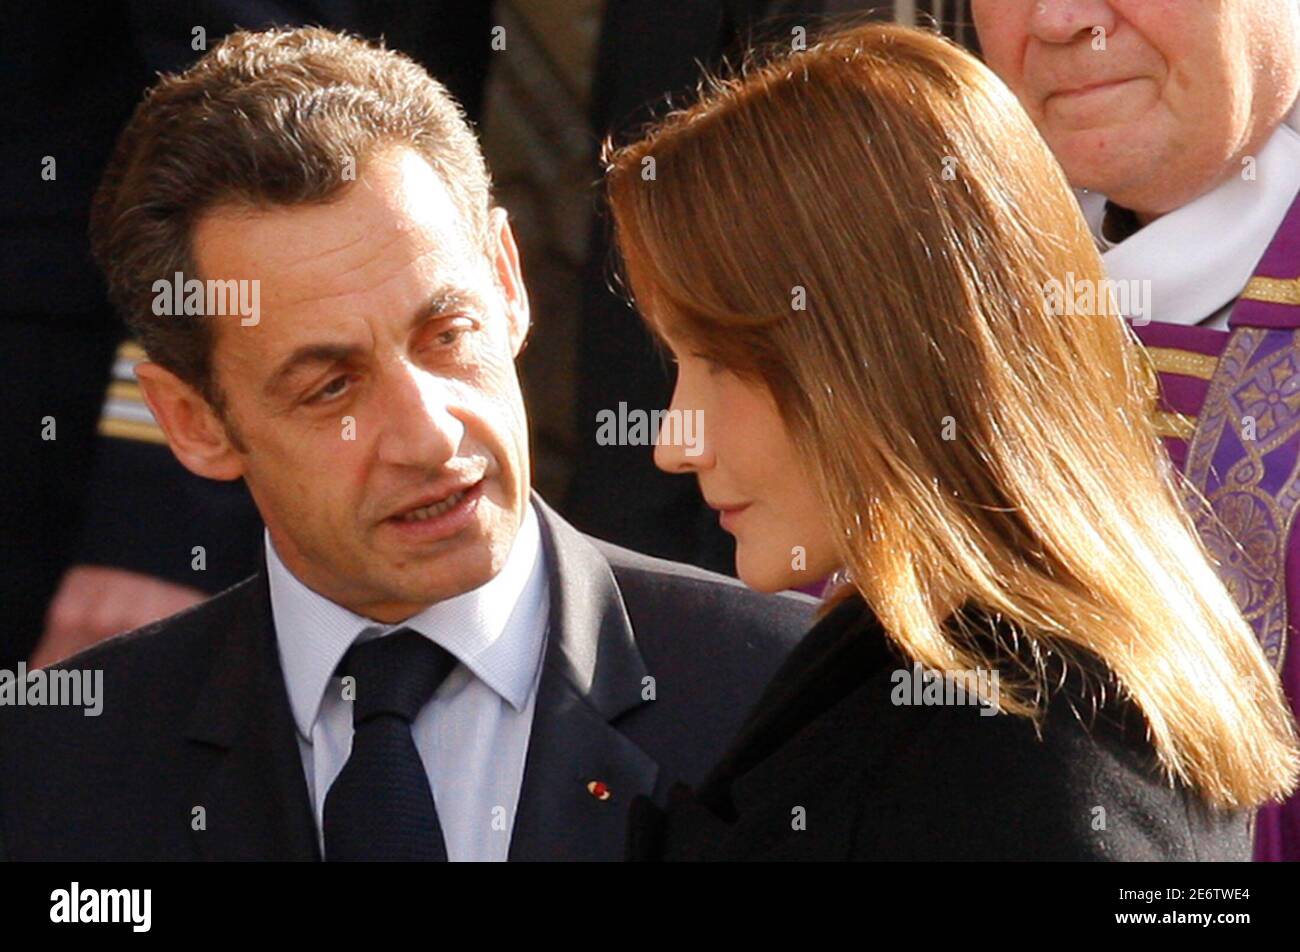 France's President Nicolas Sarkozy (L) and his wife Carla Bruni-Sarkozy  arrive at Notre Dame Cathedral in Paris October 22, 2008 to attend a  memorial mass in tribute to French nun, Sister Emmanuelle.